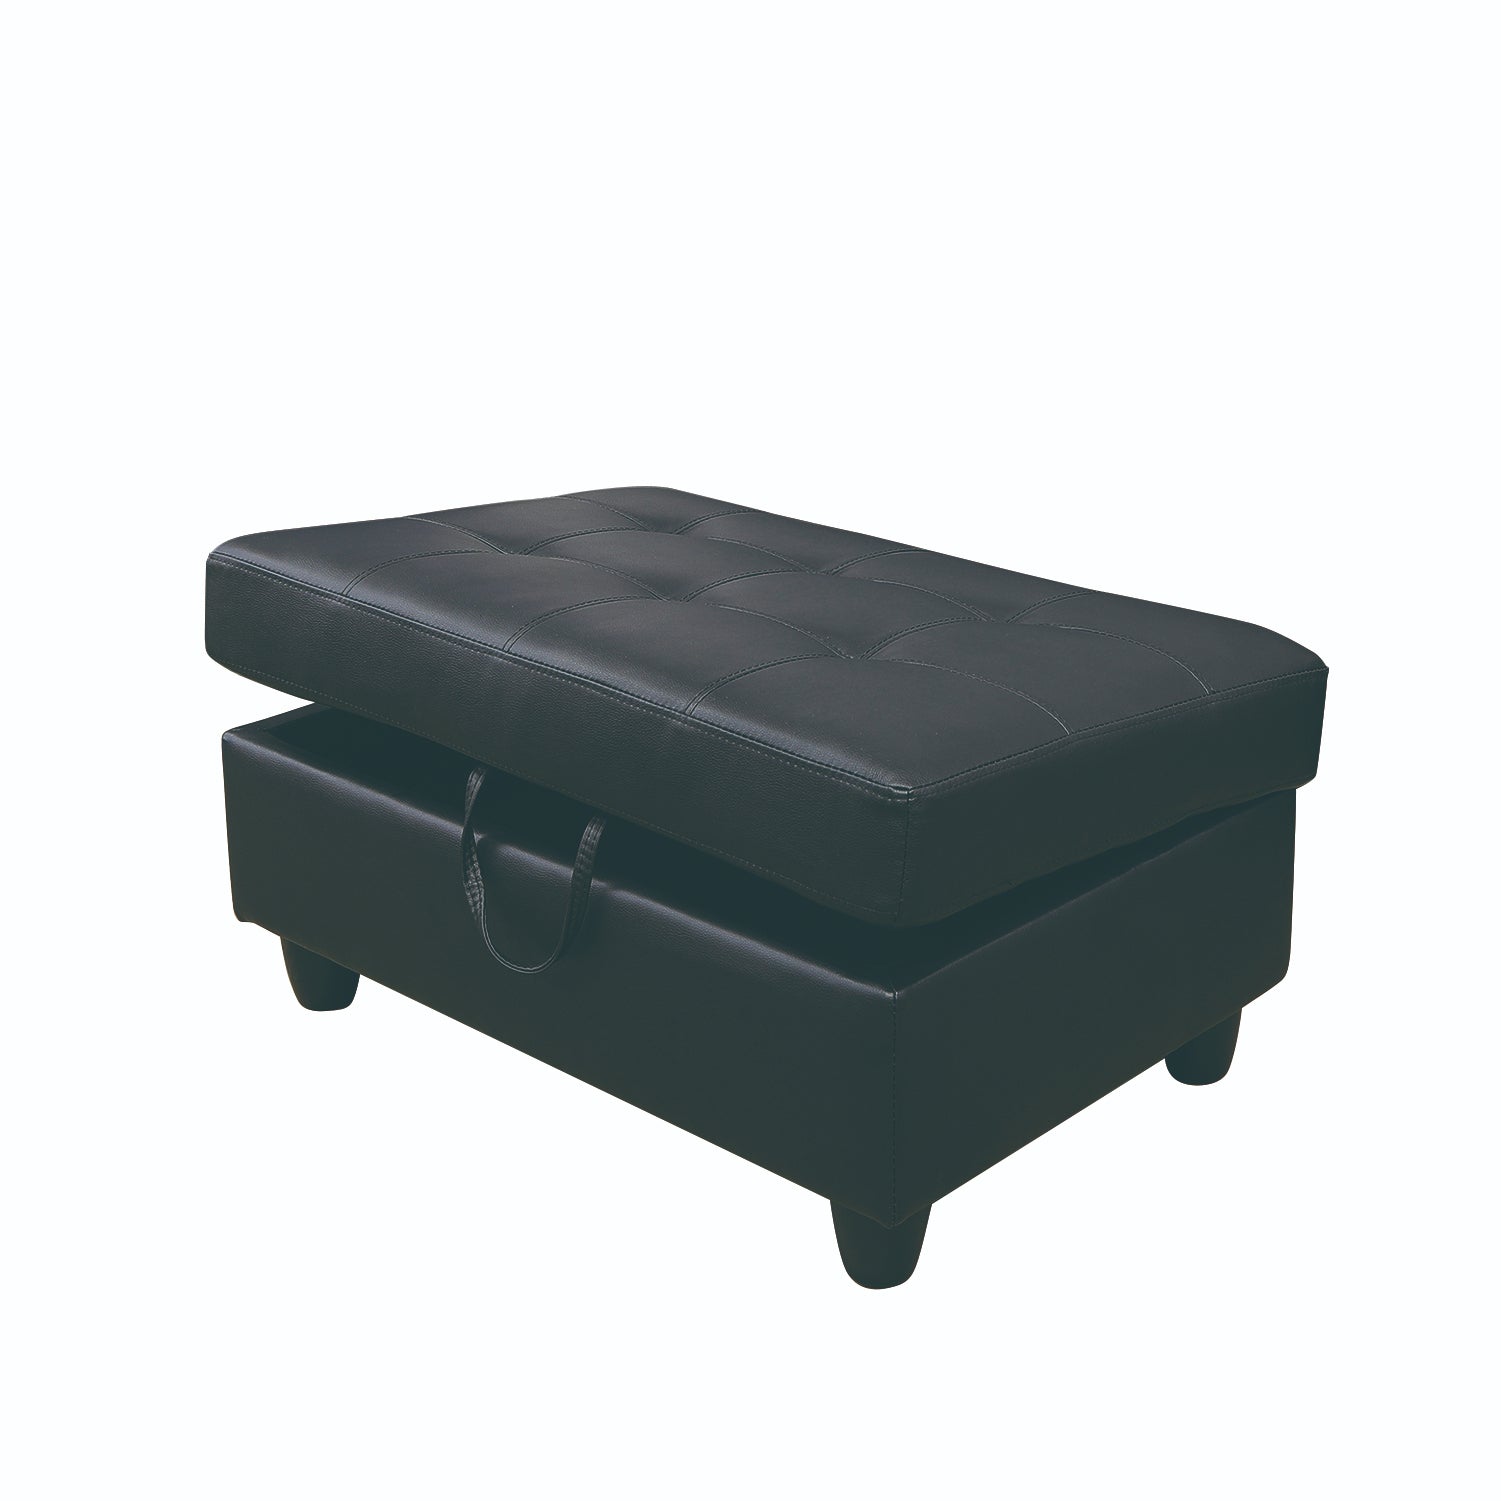 Rectangular Tufted Faux Leather Accent Storage Ottoman, Black